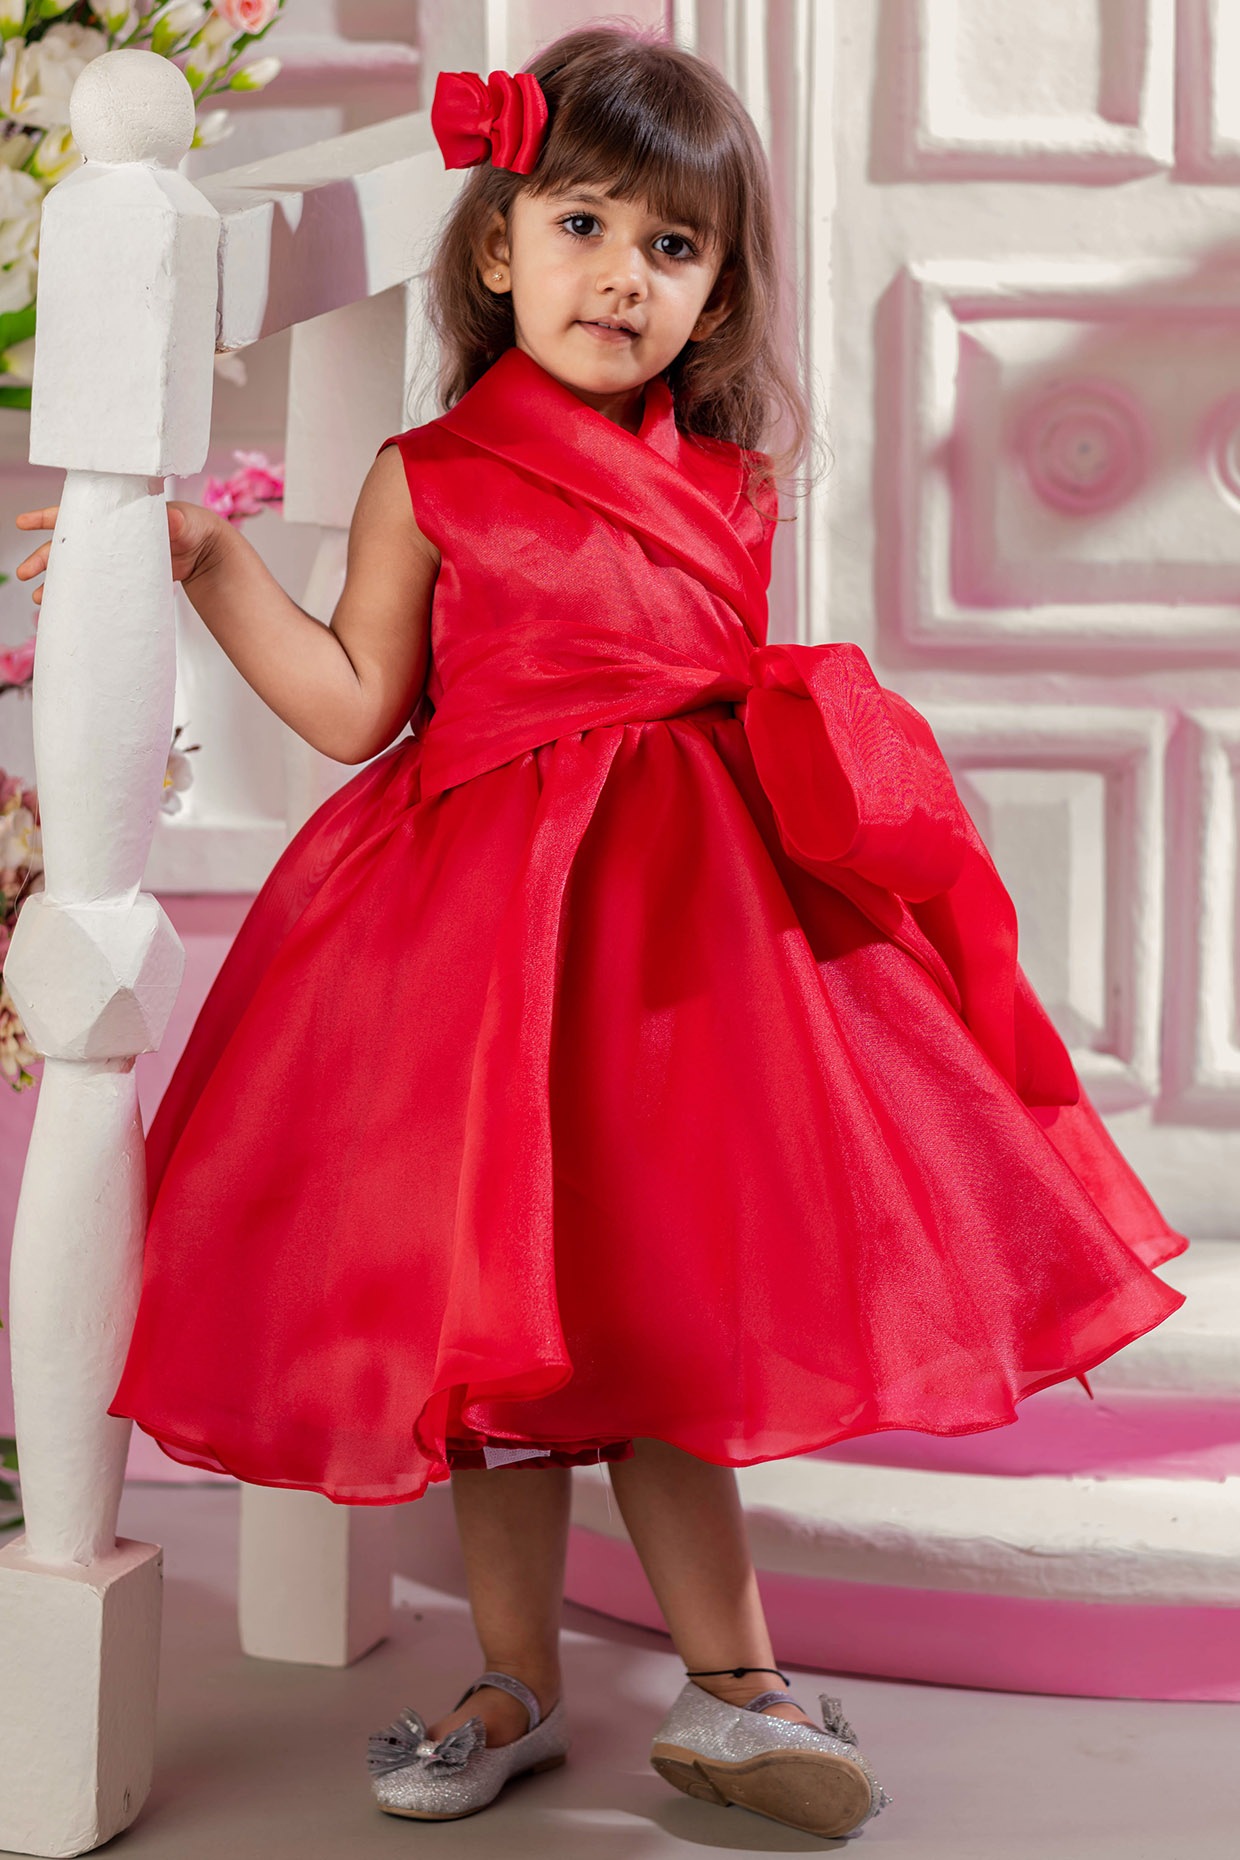 Knitting Knitters by Ritu Creations - Girl's Frock For Age: 4 - 5 yrs Wool:  Vardhaman/Oswal Baby wool Price: Rs.1299/- + Courier charges Contact:  9837006969 (whatsapp msg only) | Facebook